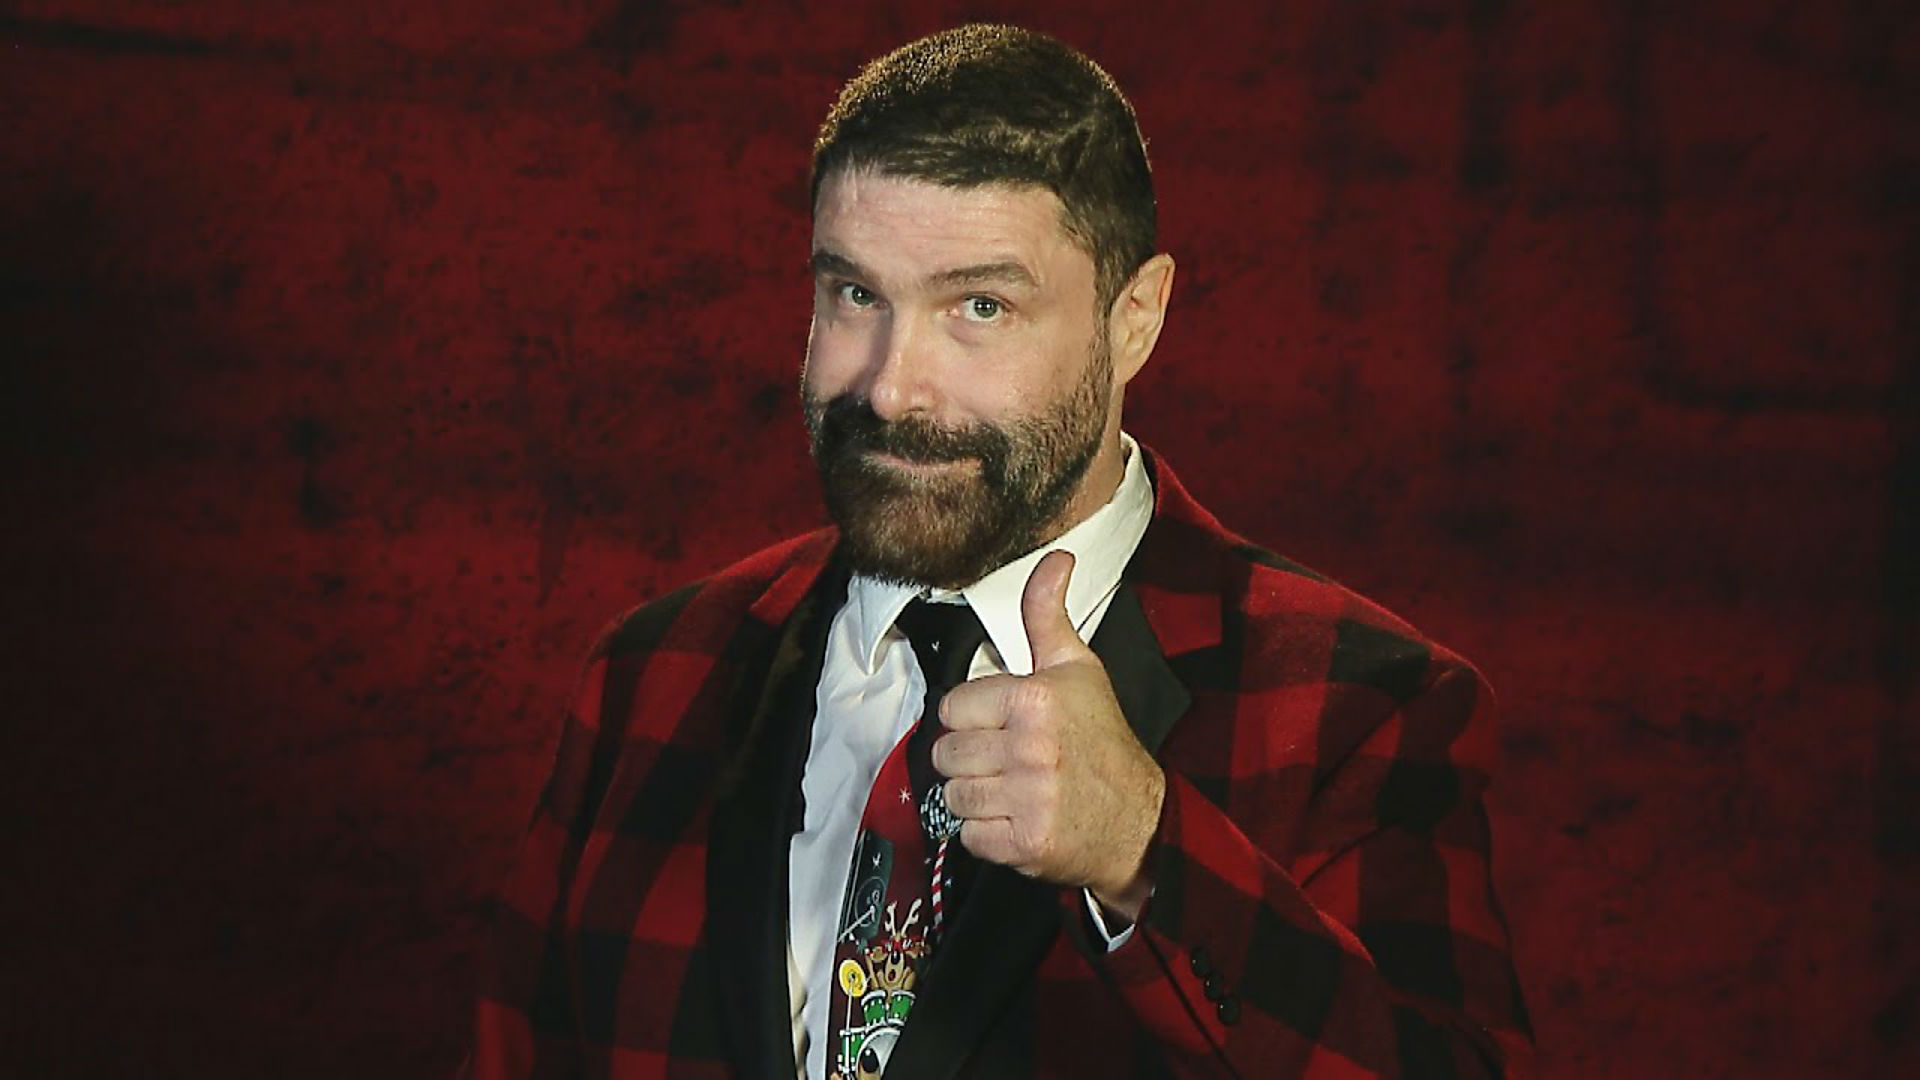 Mick Foley On The Power Of Santa Claus And Celebrating